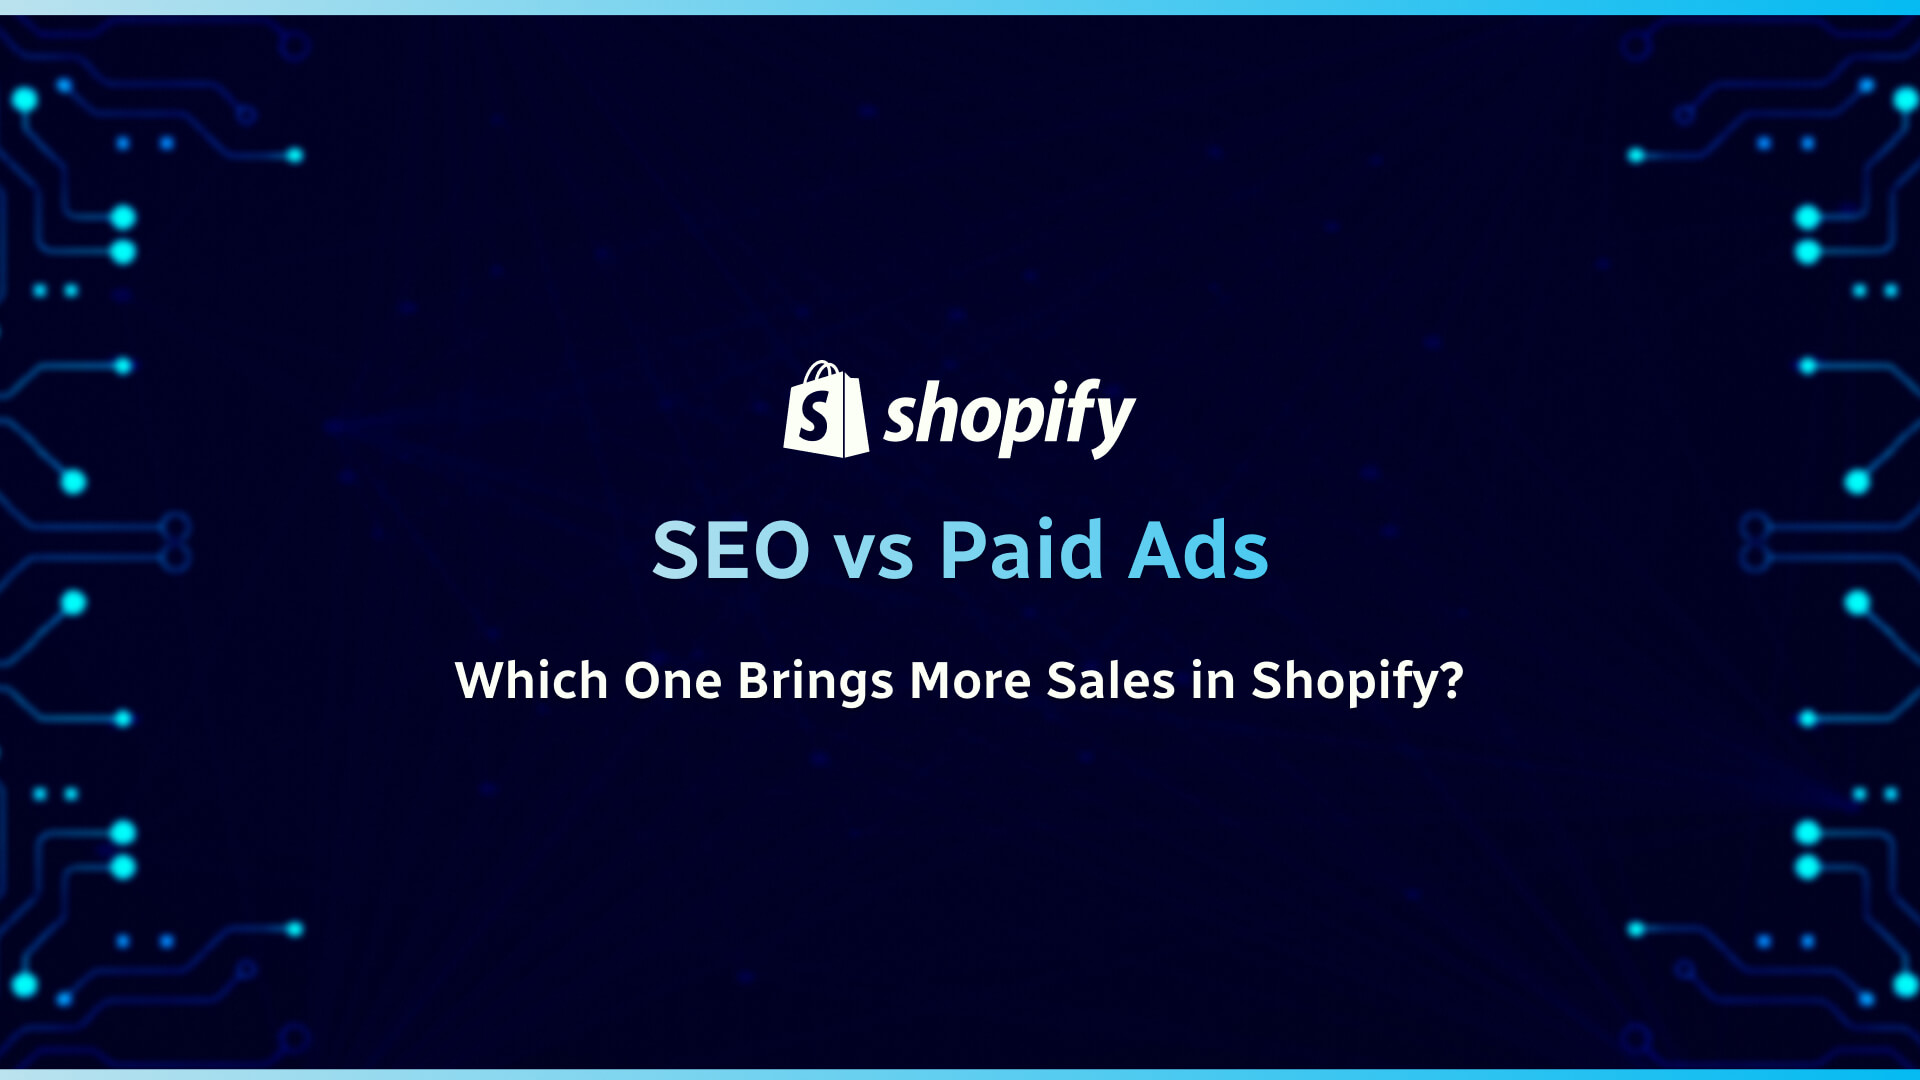 SEO vs Paid Ads: Which One Brings More Sales in Shopify?